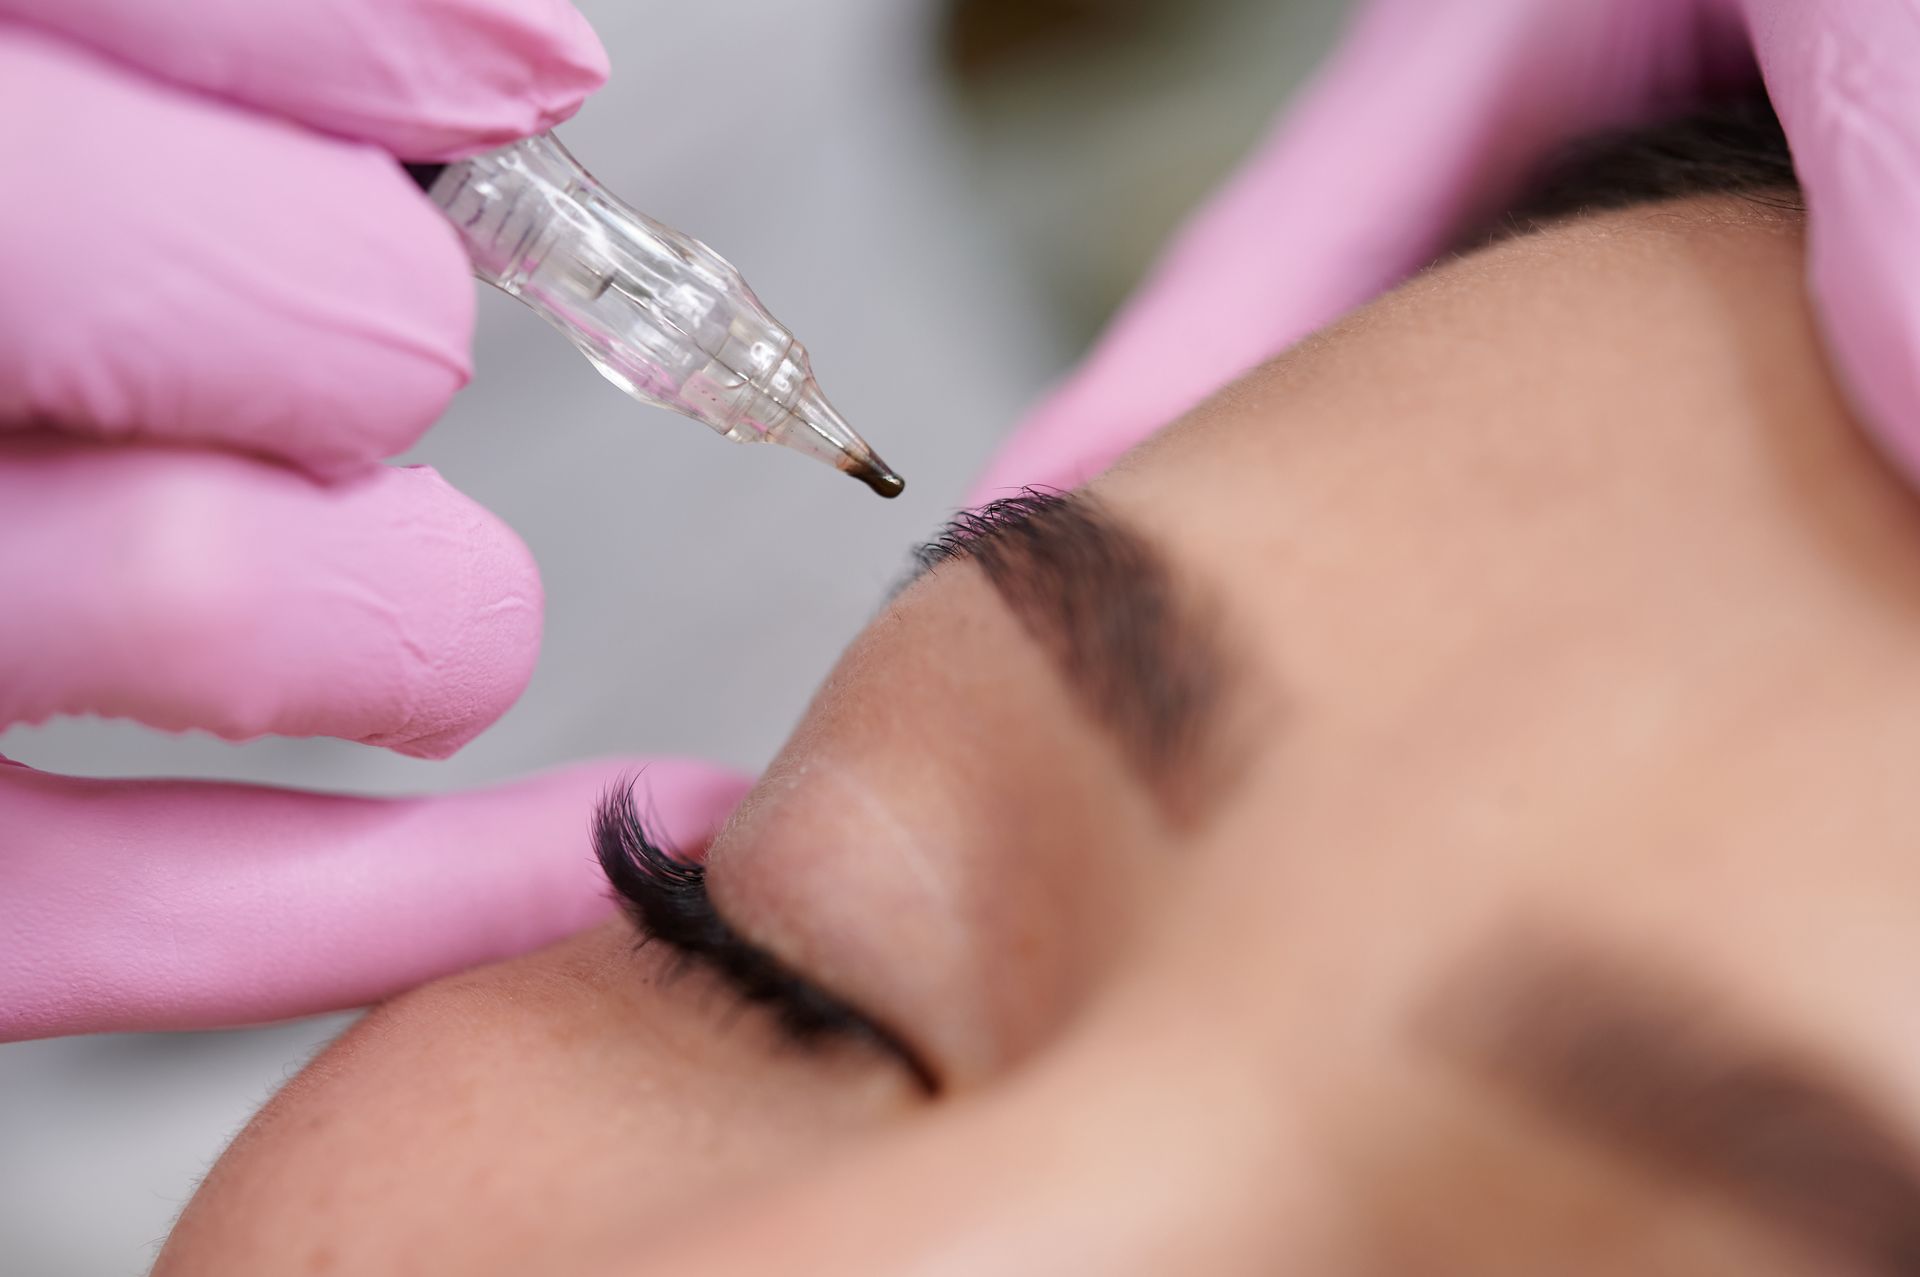 A woman is getting a permanent makeup tattoo on her eyebrows.